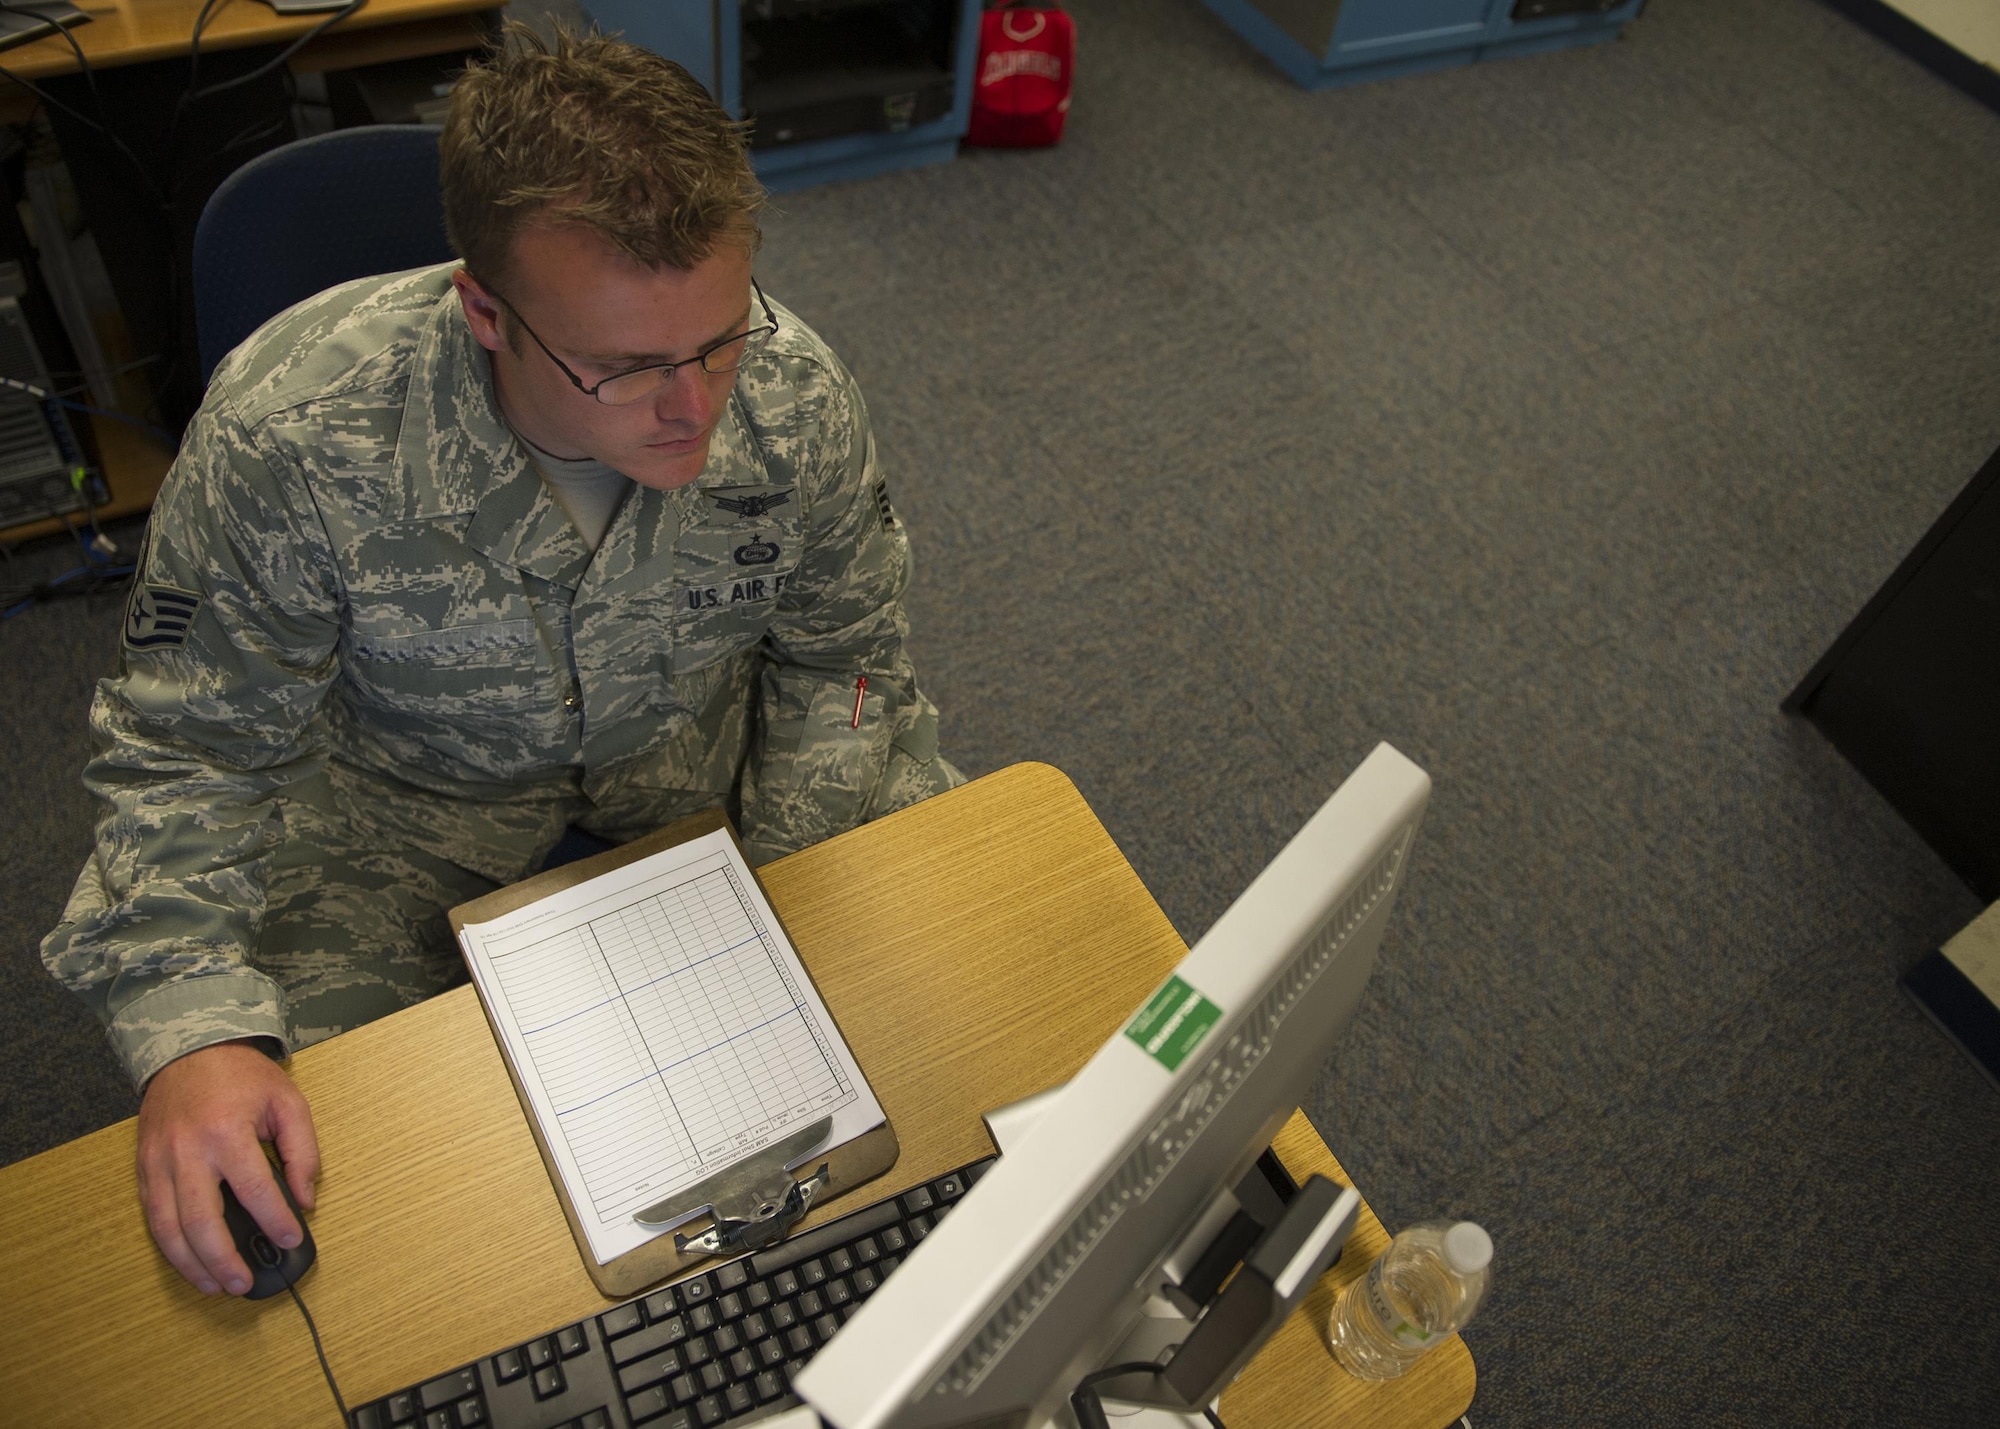 Staff Sgt. Tyler, a member of the National Air and Space Intelligence Center, watches aircraft movement during a Red Flag exercise Thursday, Aug. 20, 2015 at Nellis Air Force Base, Nev. NASIC provides real-time documentation to help train both U.S. and allied nations’combat air forces. The exercise gives pilots the experience of multiple, intensive air combat sorties in the safety of a training environment. (U.S. Air Force photo illustration by Senior Airman Justyn Freeman)